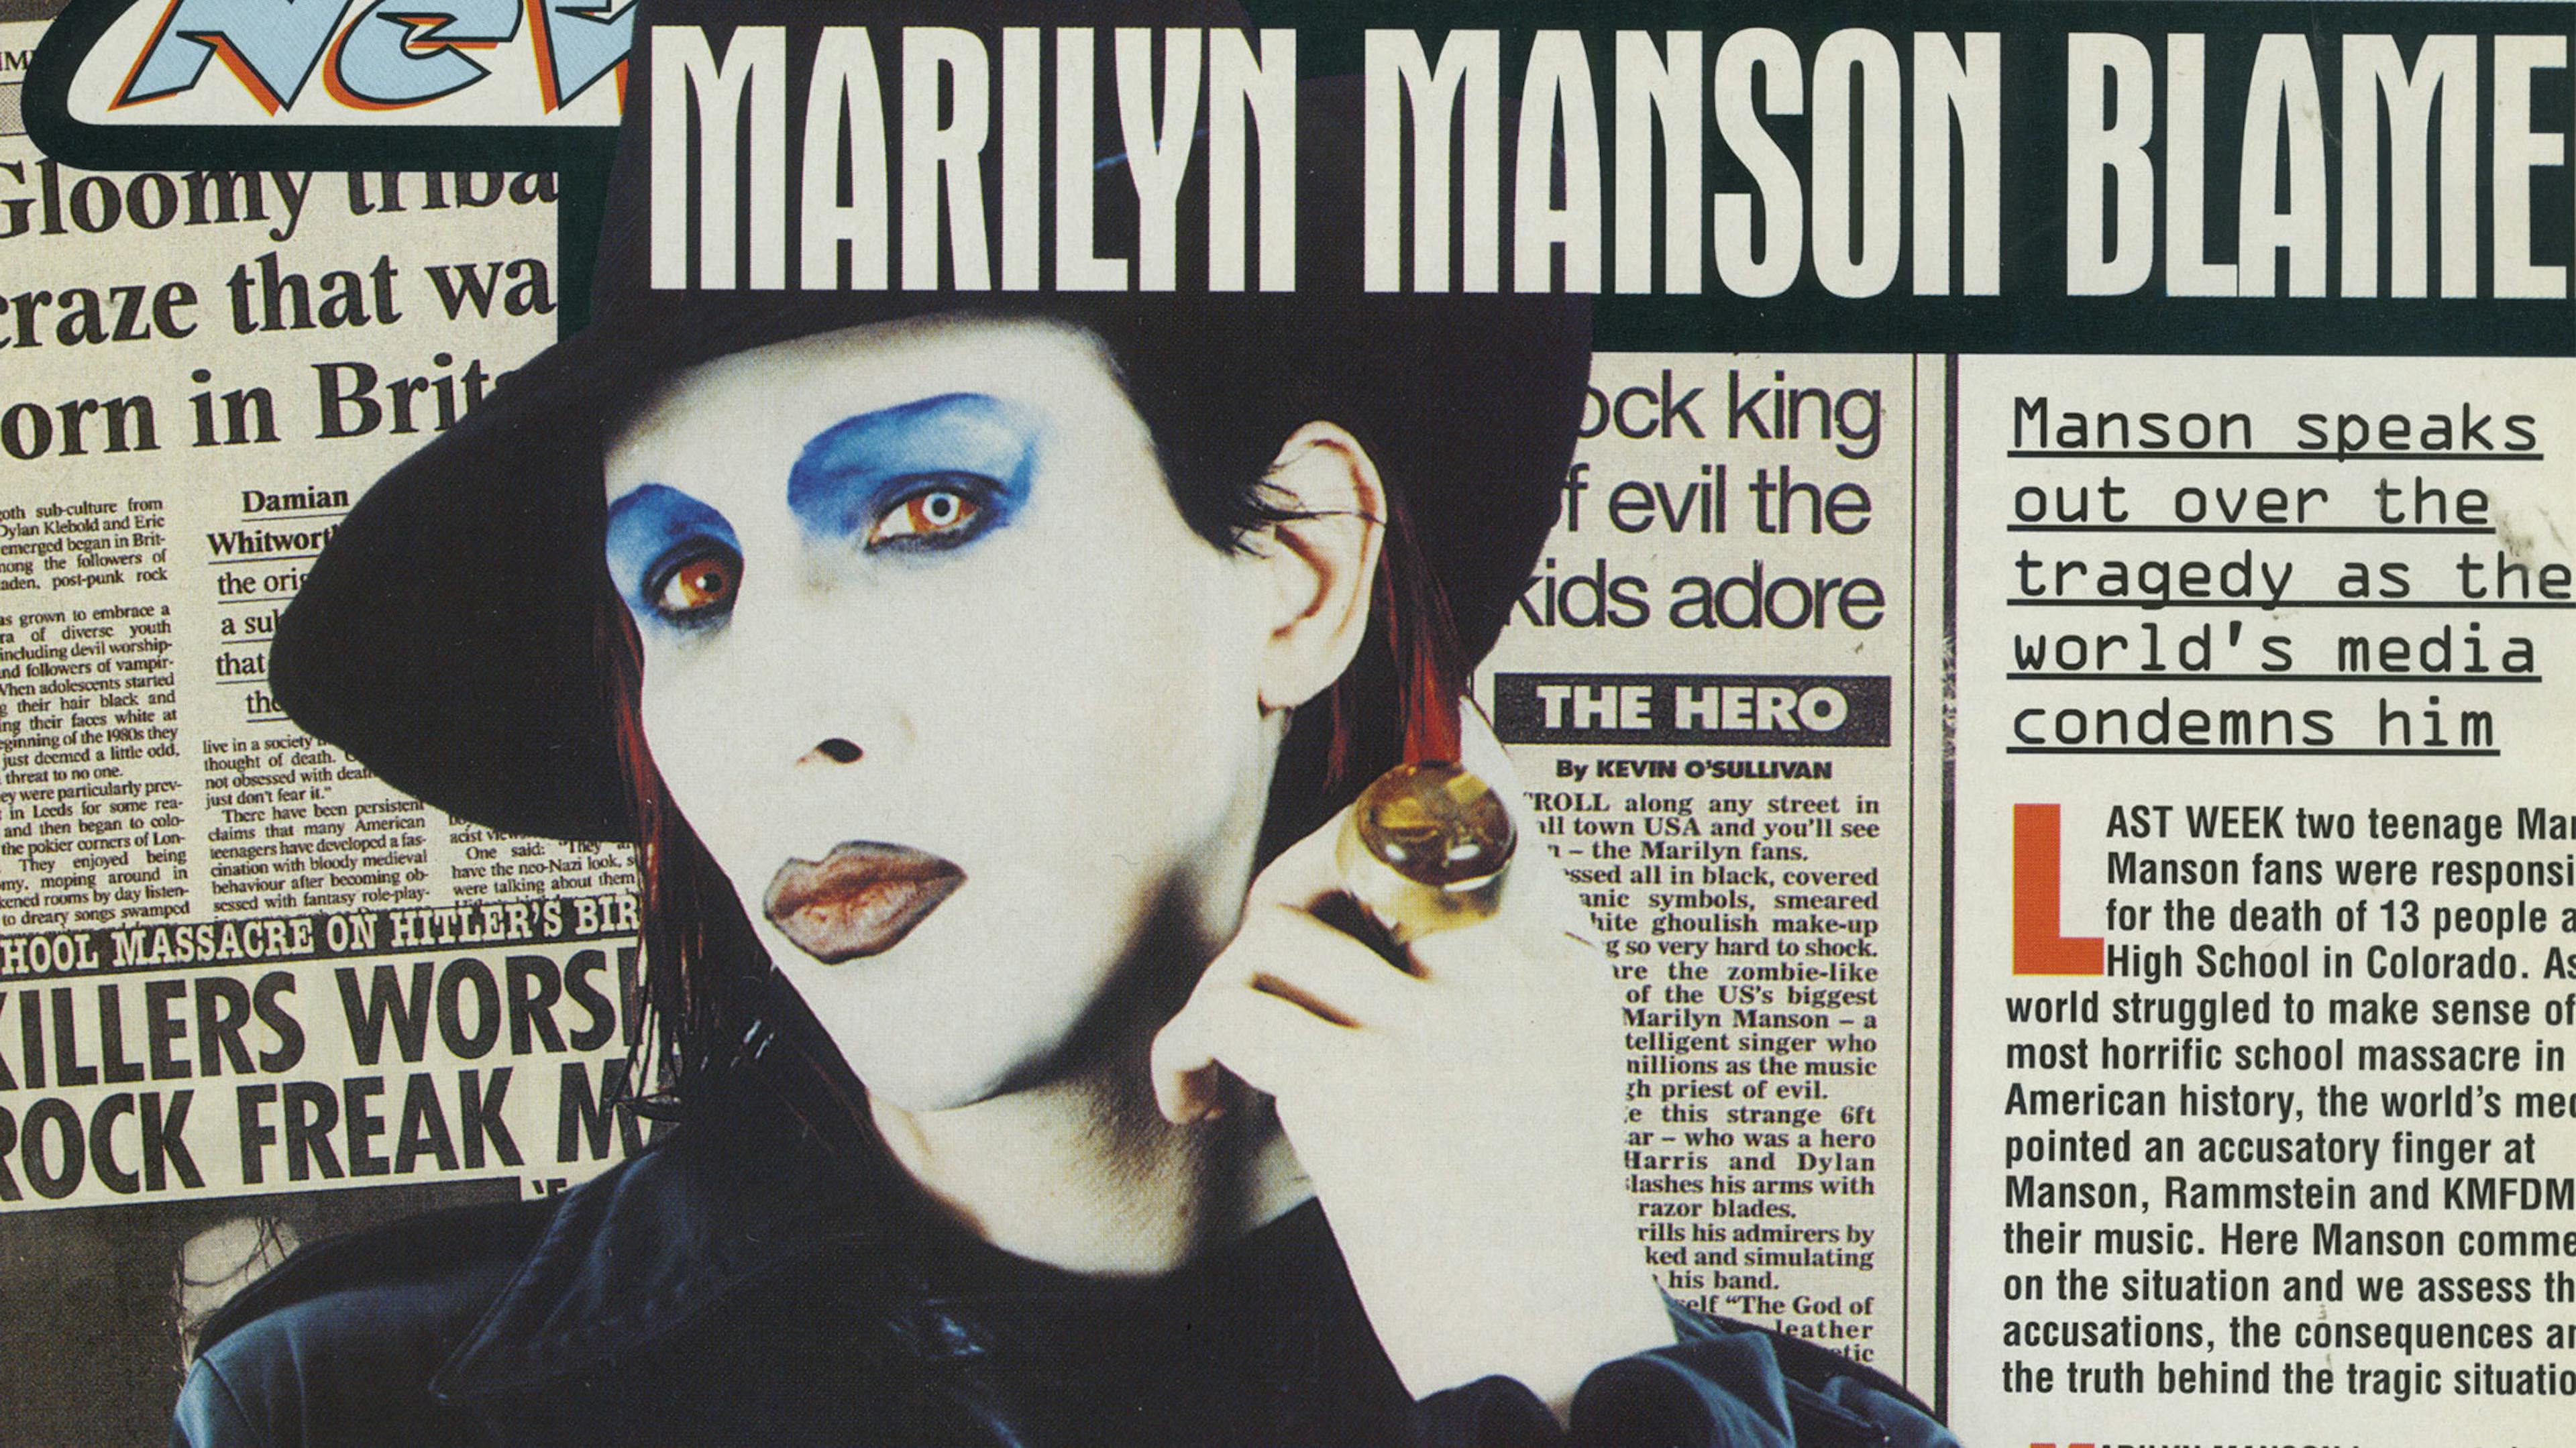 Columbine: How Marilyn Manson Became Mainstream Media's Scapegoat